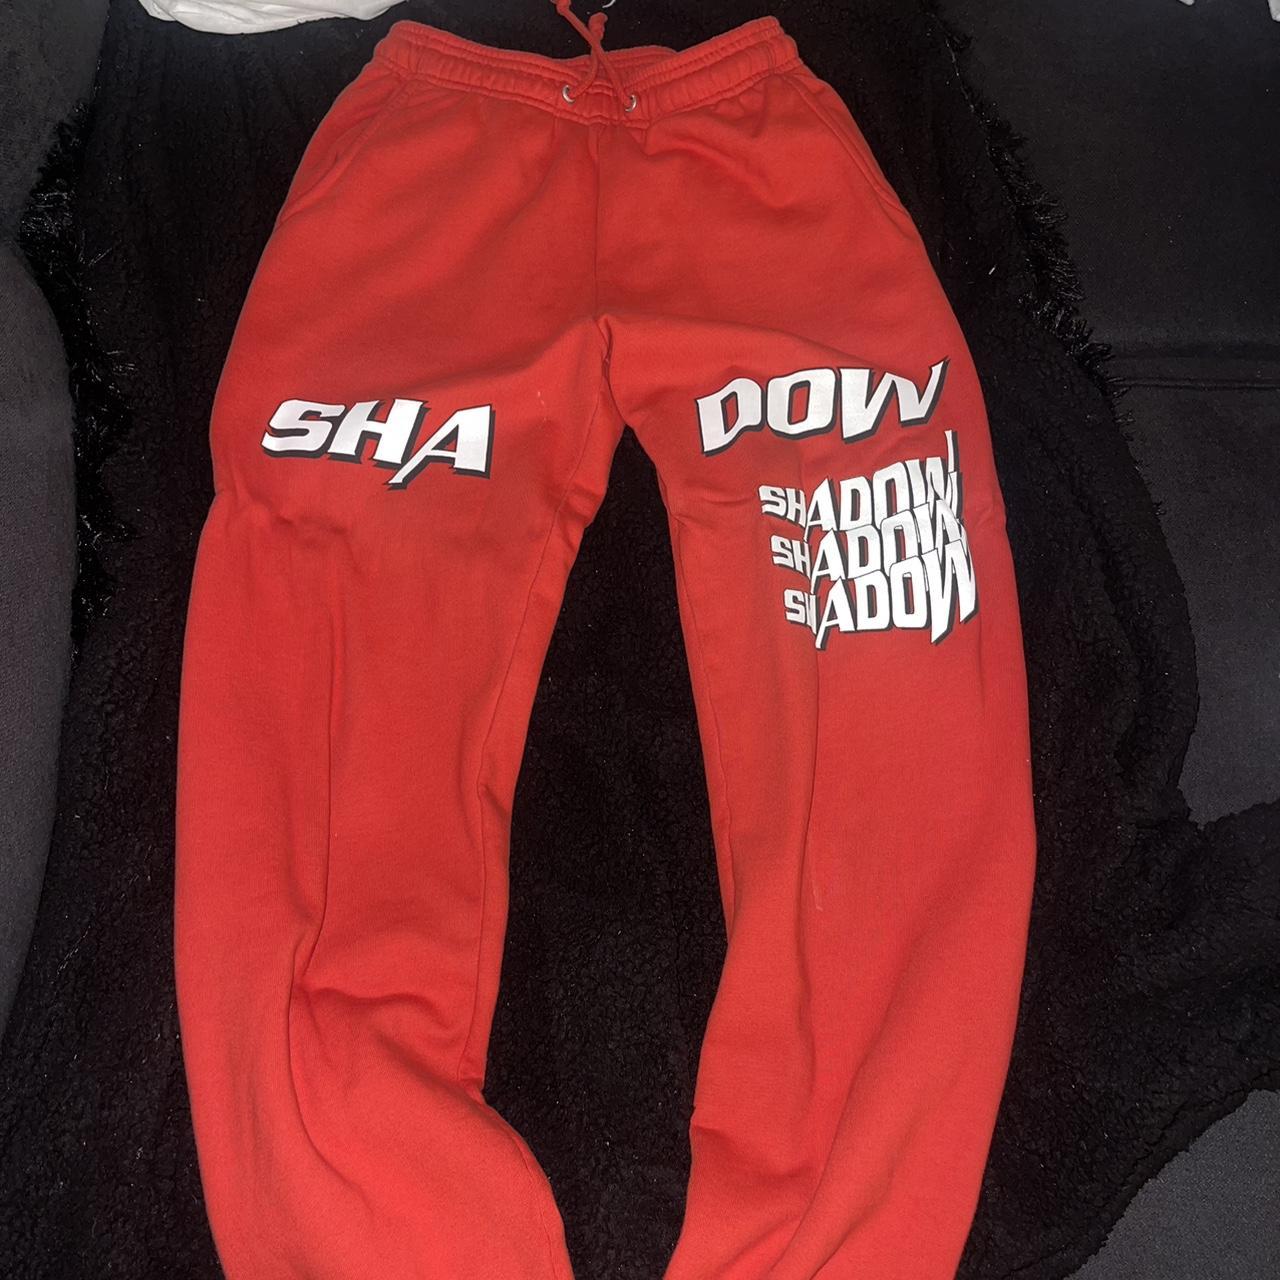 shadow hill red sweatpants size xs, loose fitted ️ - Depop